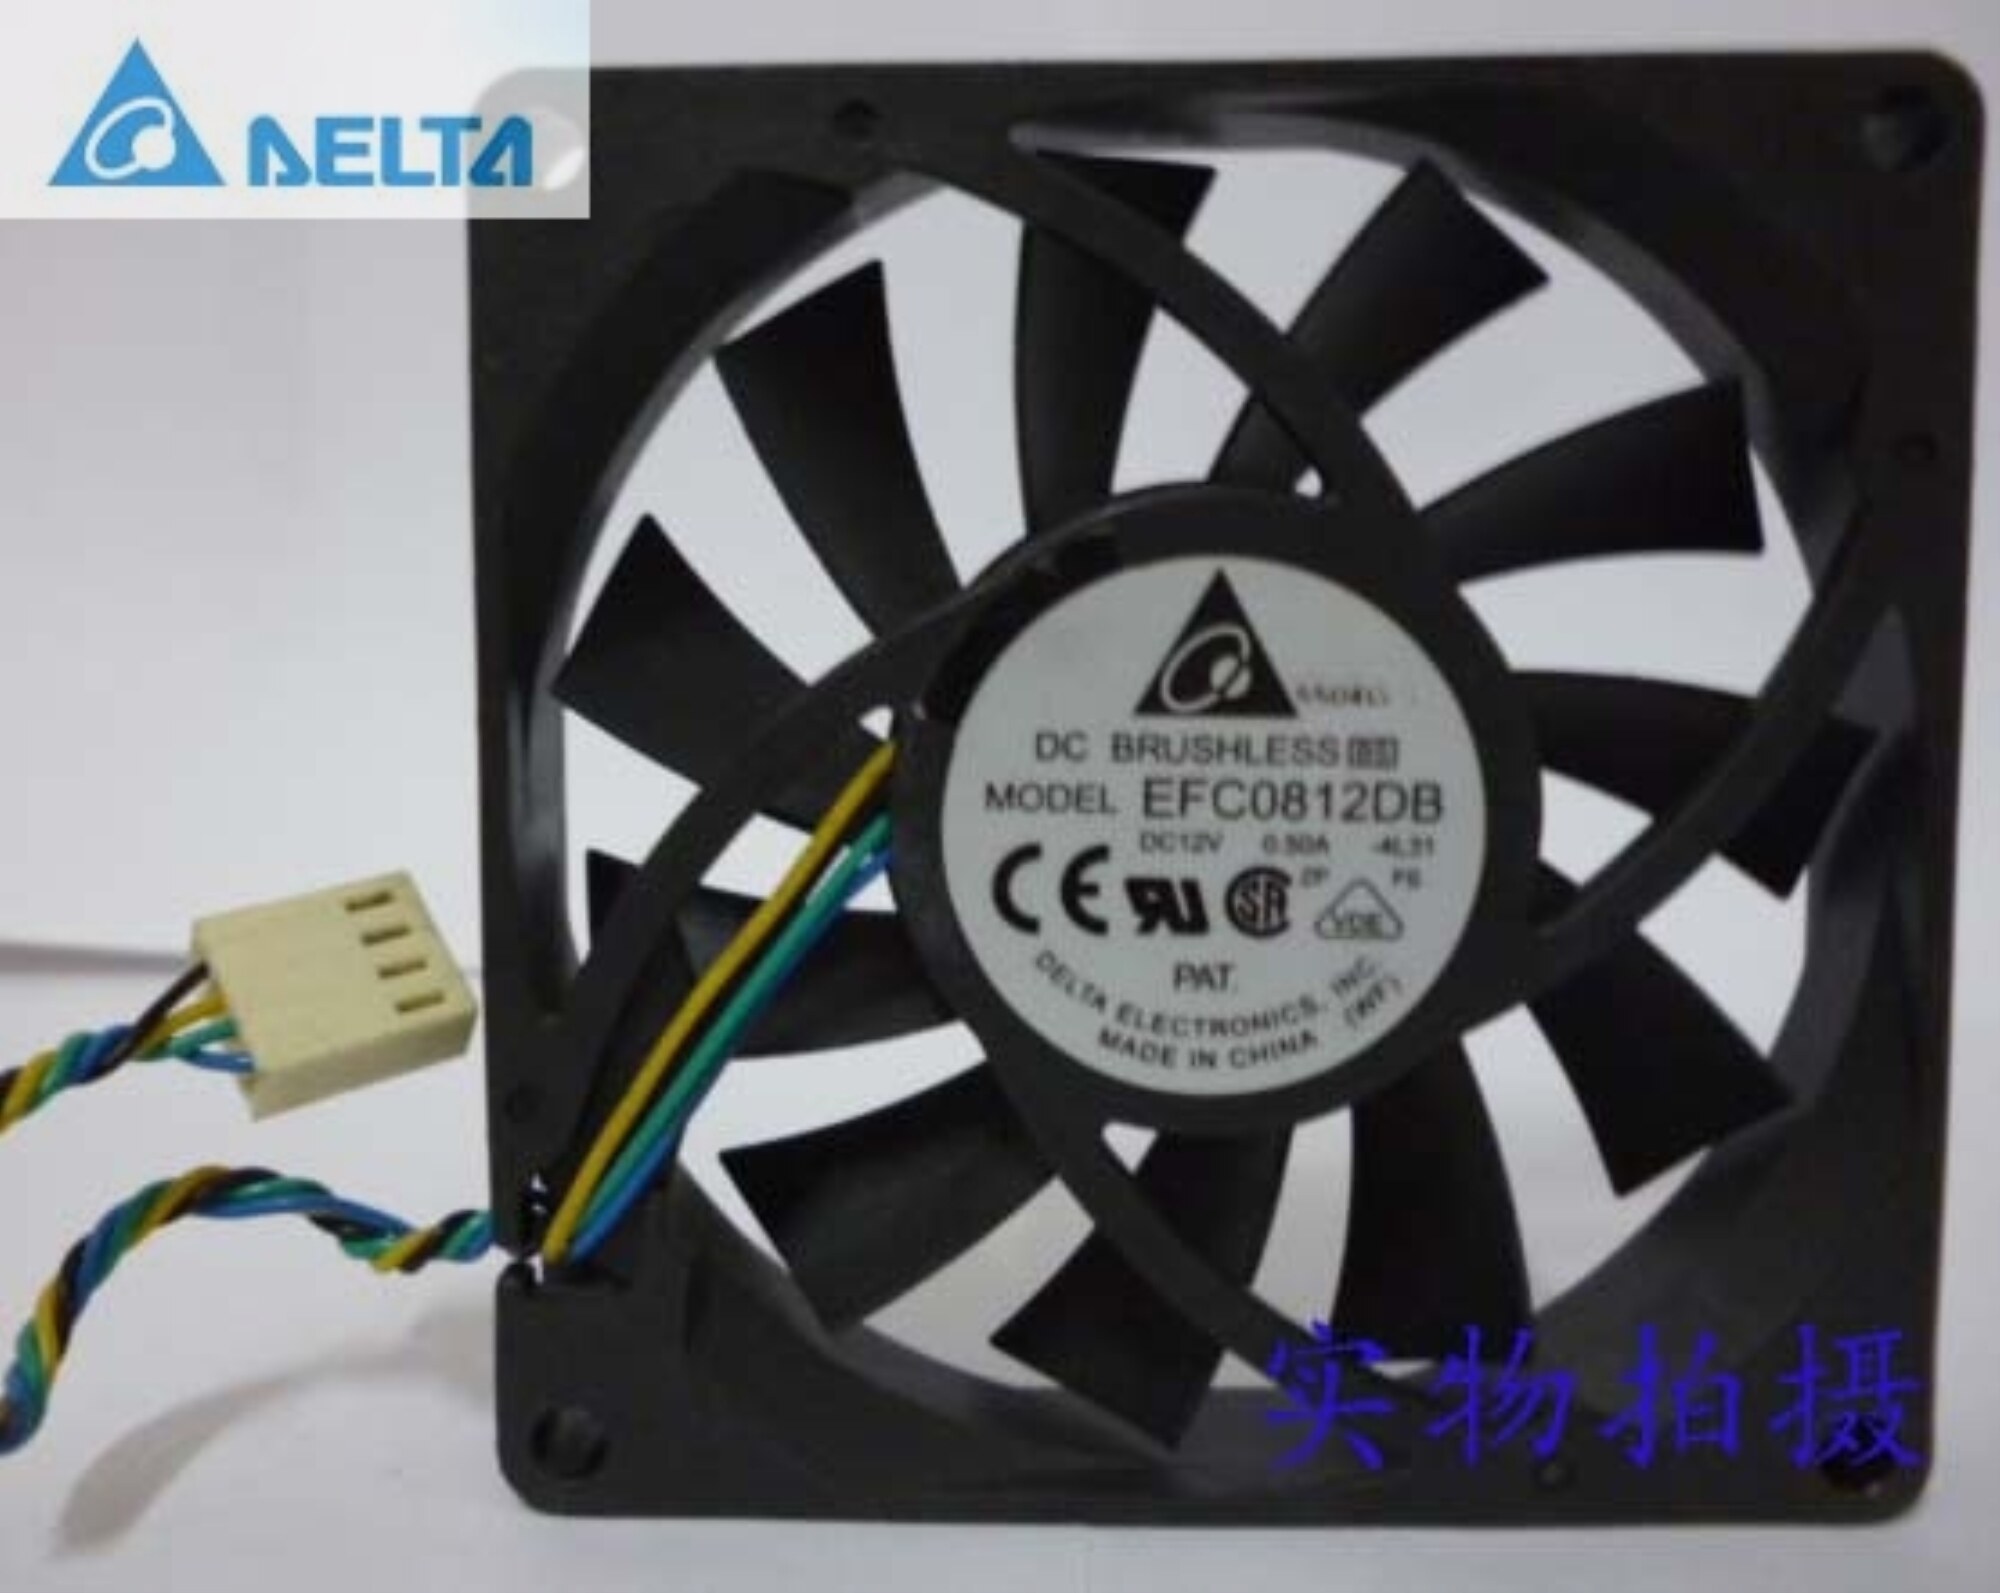 1pc Delta EFB0812HHB 80x80x15mm 80mm 8015 12V 0.4A DC CPU Cooling Fan 2pin wire